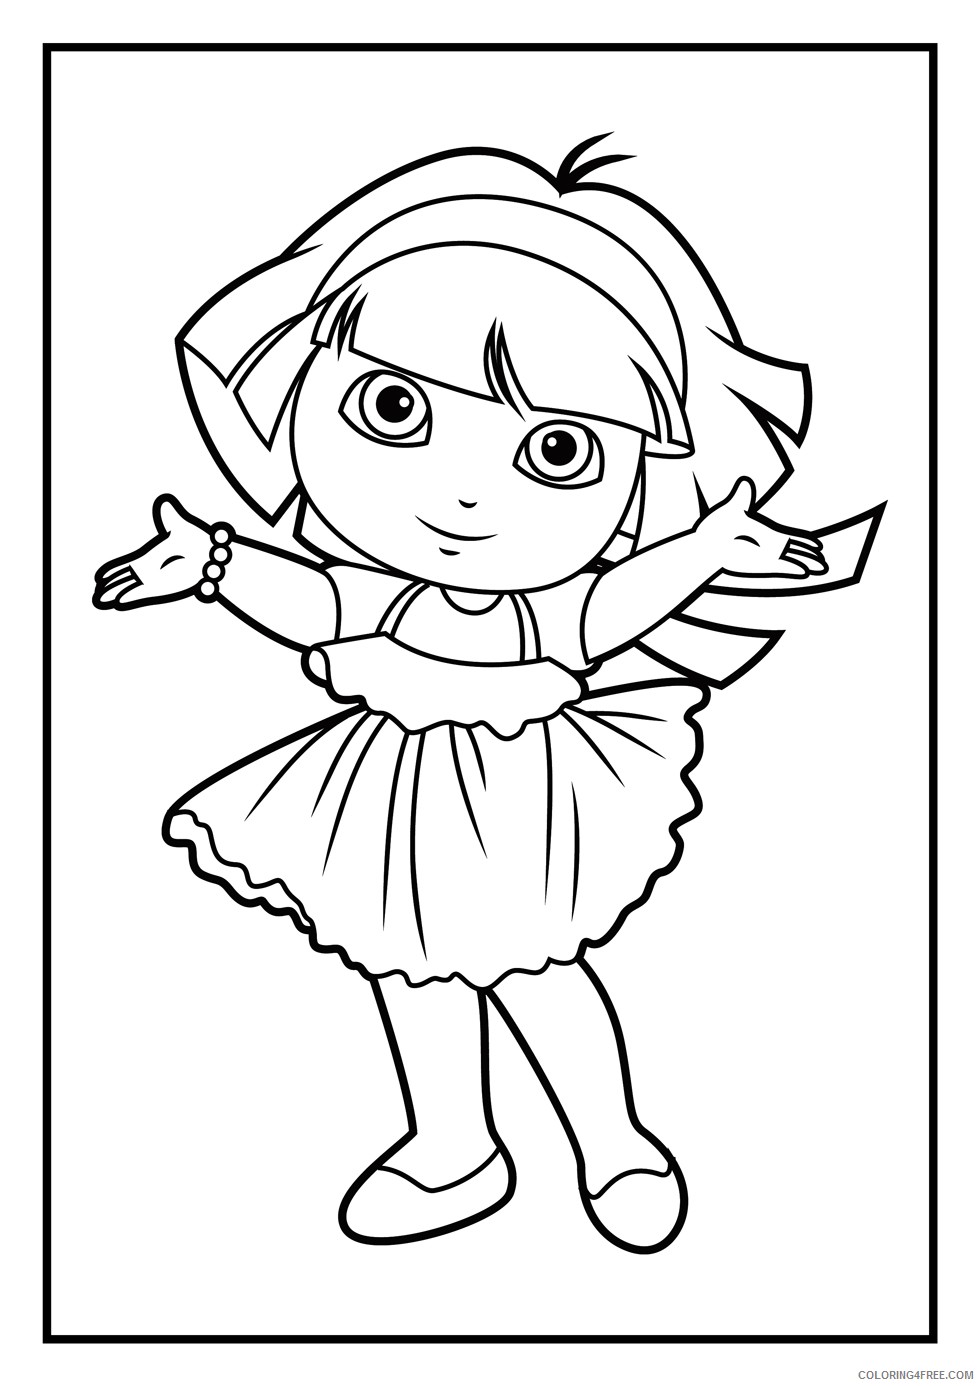 dora coloring pages for kids Coloring4free